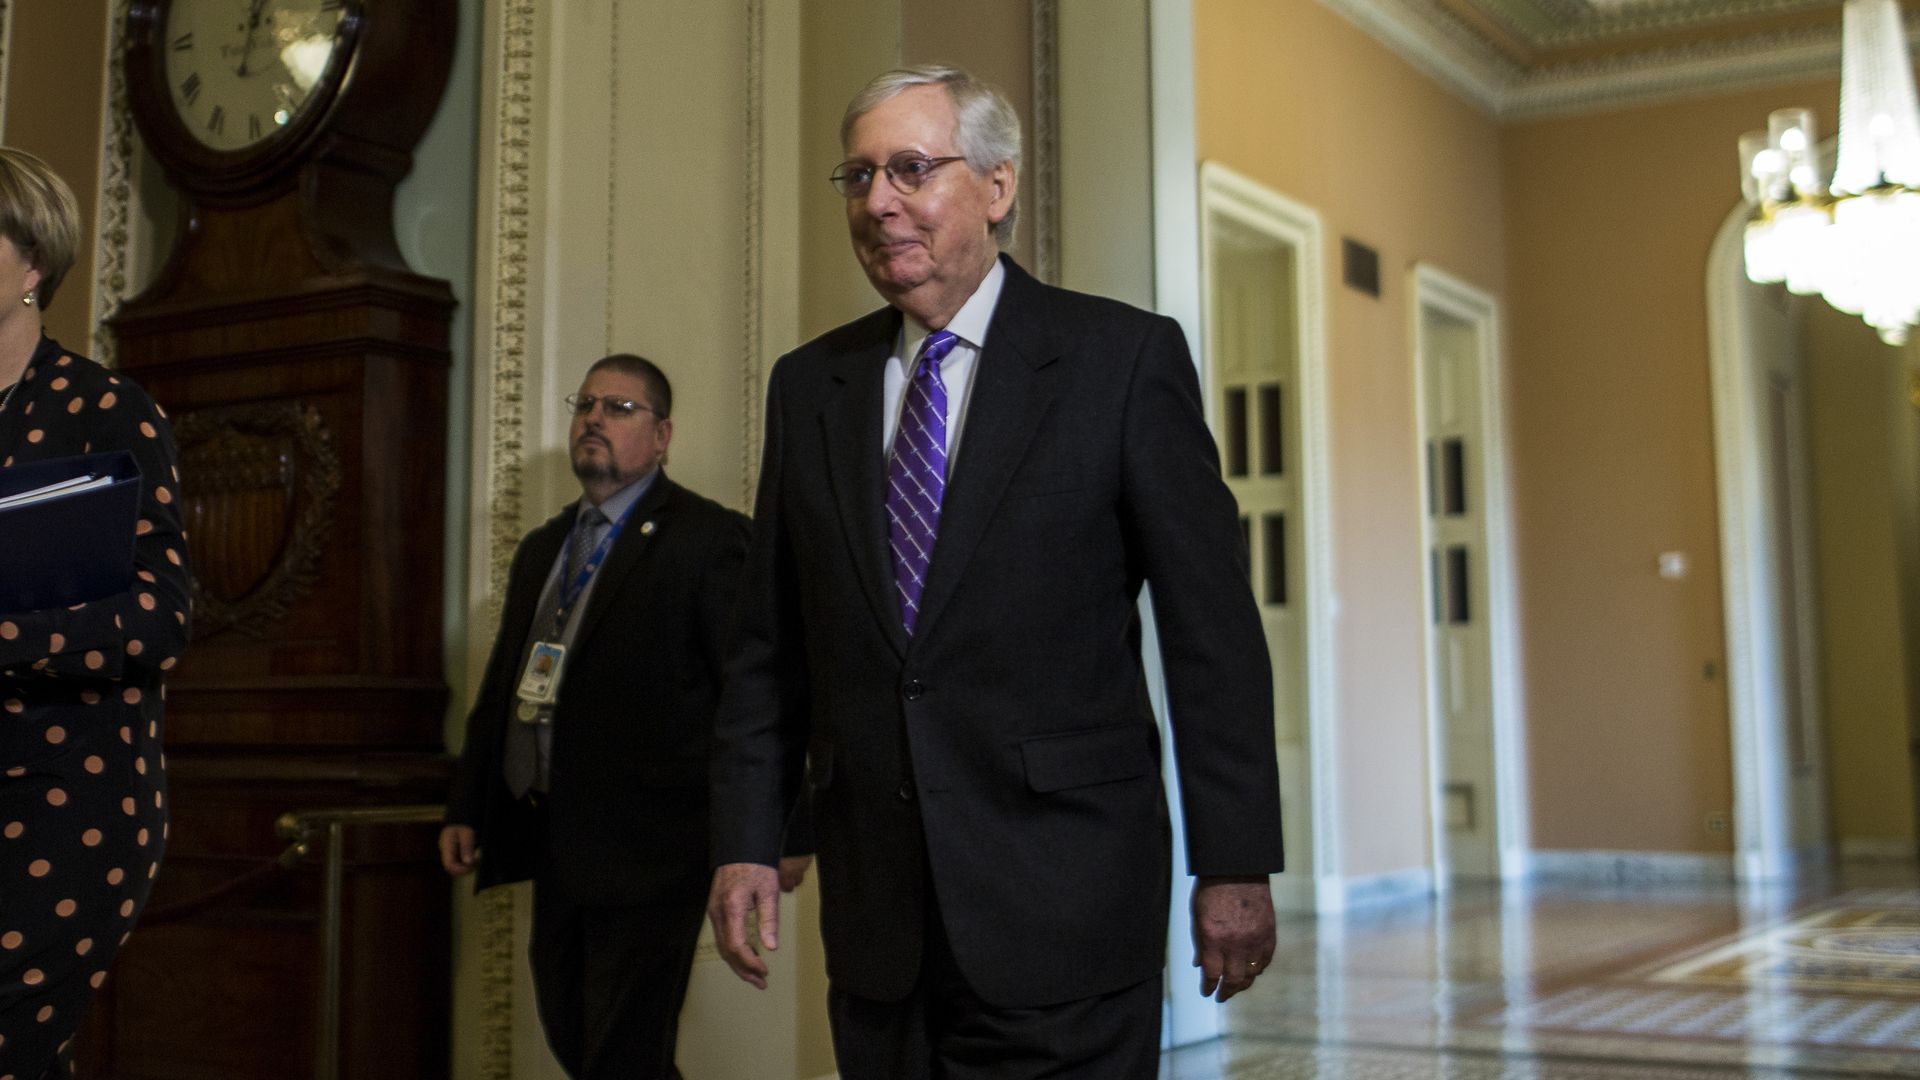 Senate Majority Leader Mitch McConnell (R-KY) walks through the Capitol Building during the Senate impeachment trial 